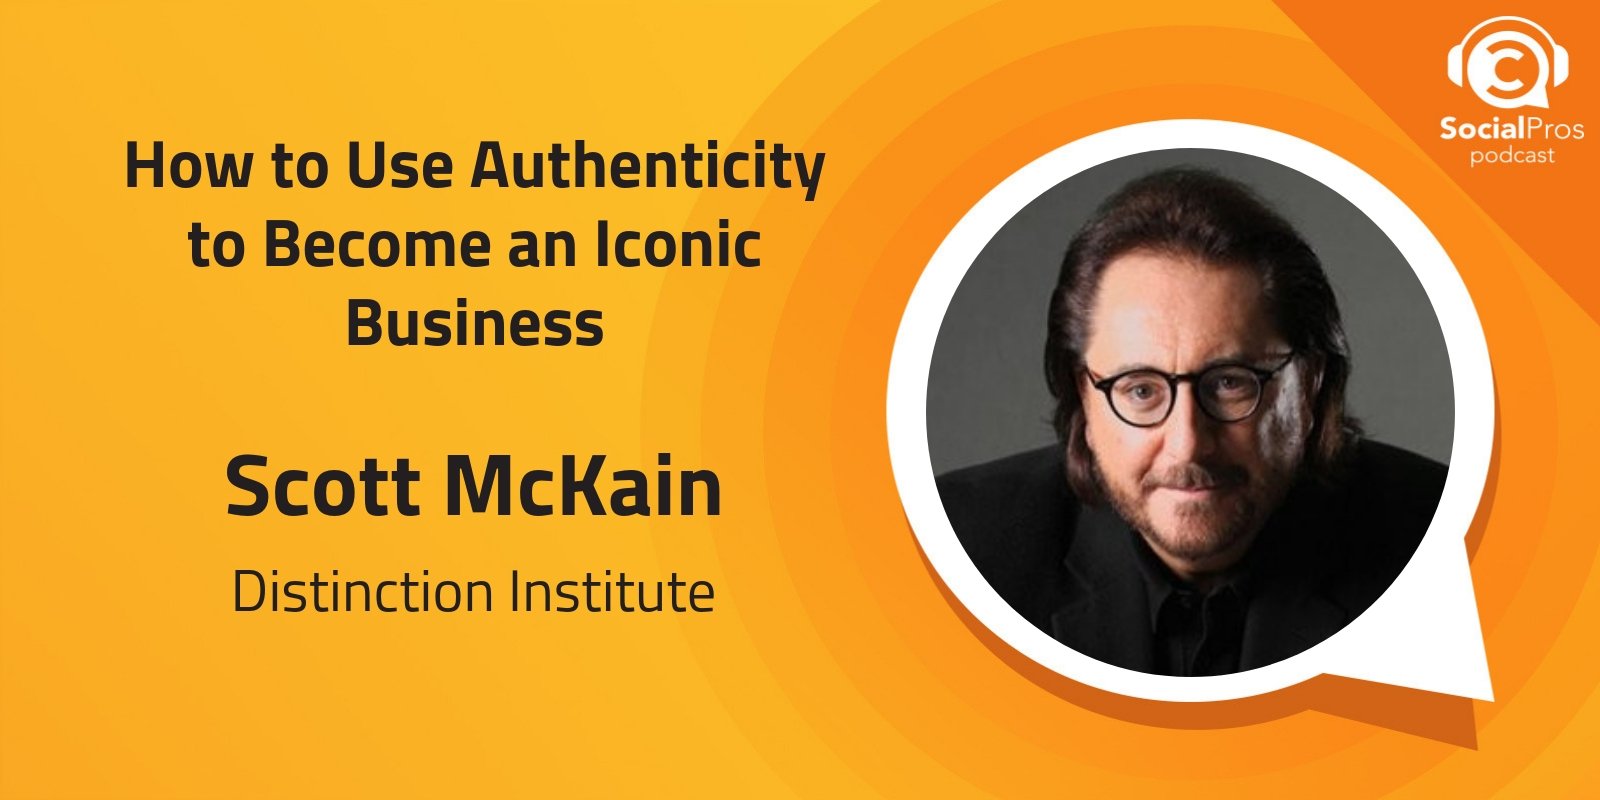 How to Use Authenticity to Become an Iconic Business